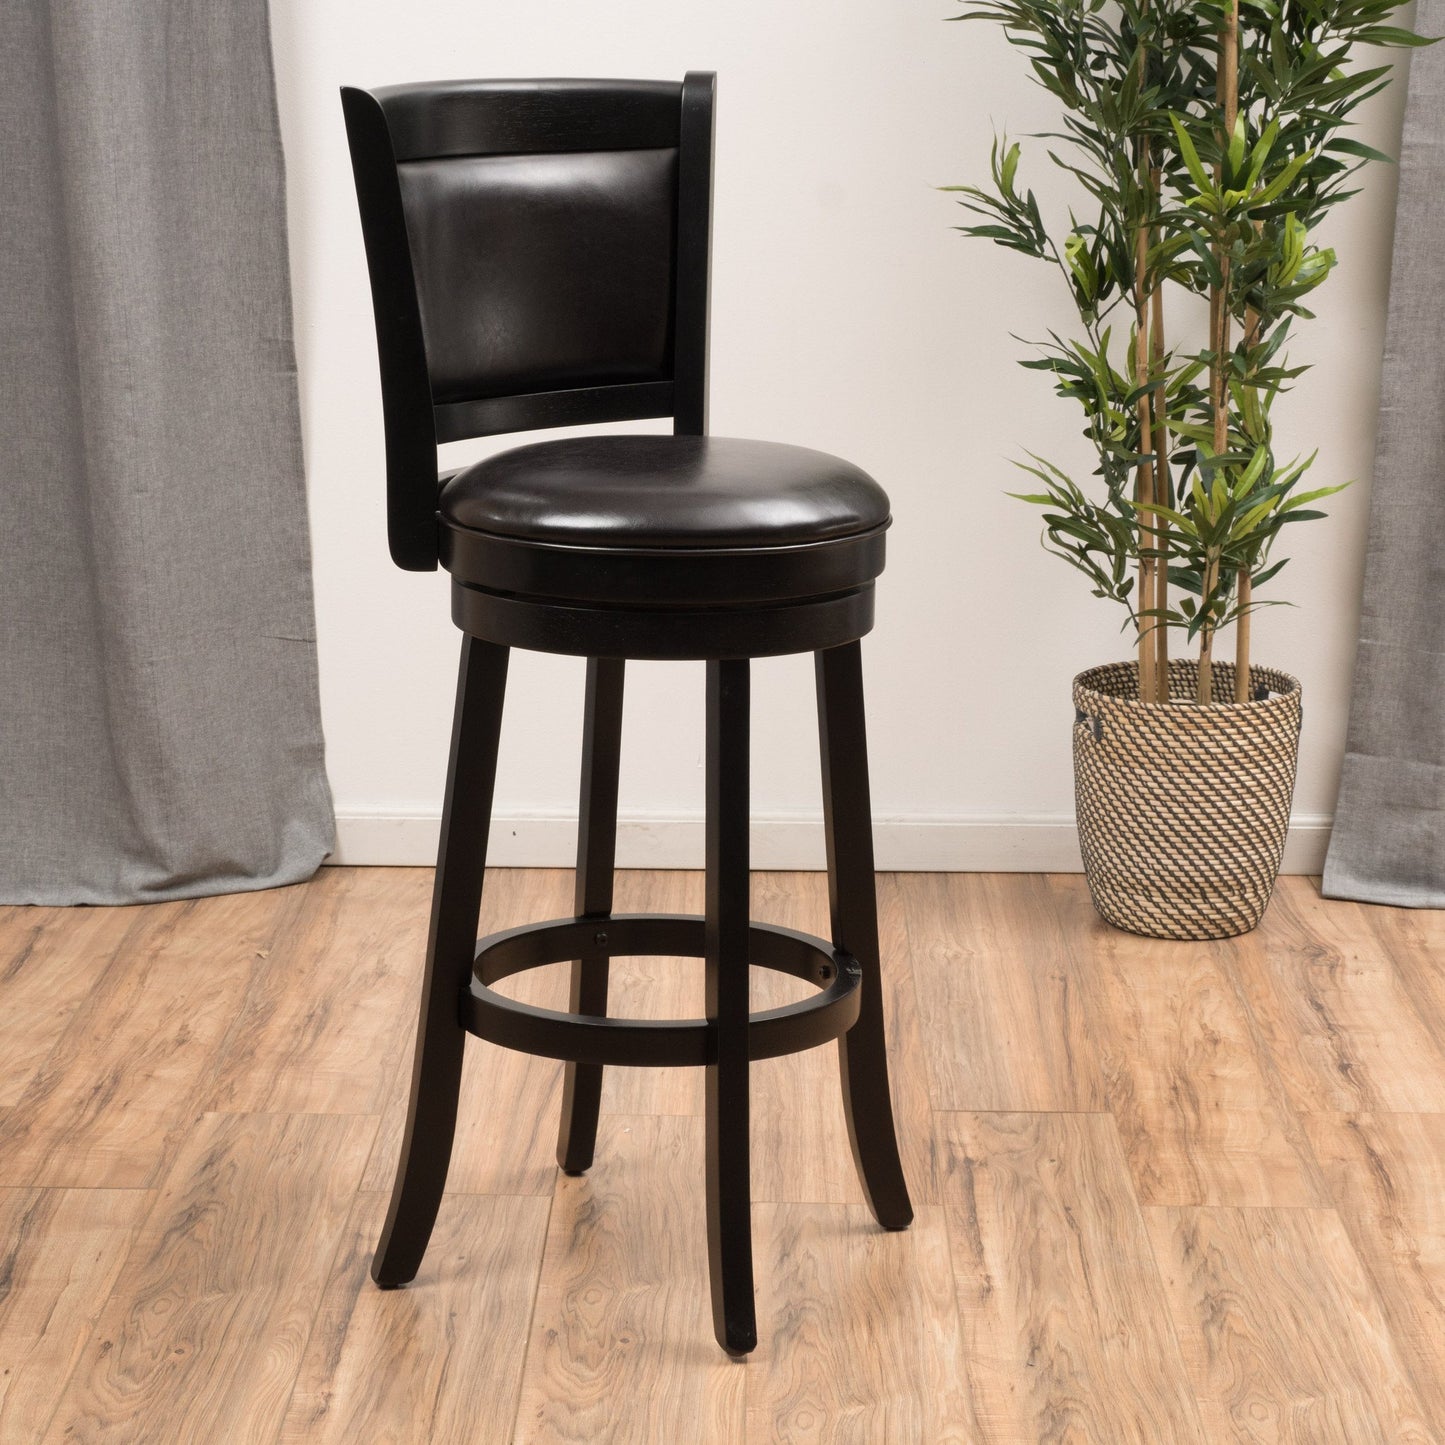 Traditional Upholstered Espresso Leather Swivel Backed Barstool with Wood Frame